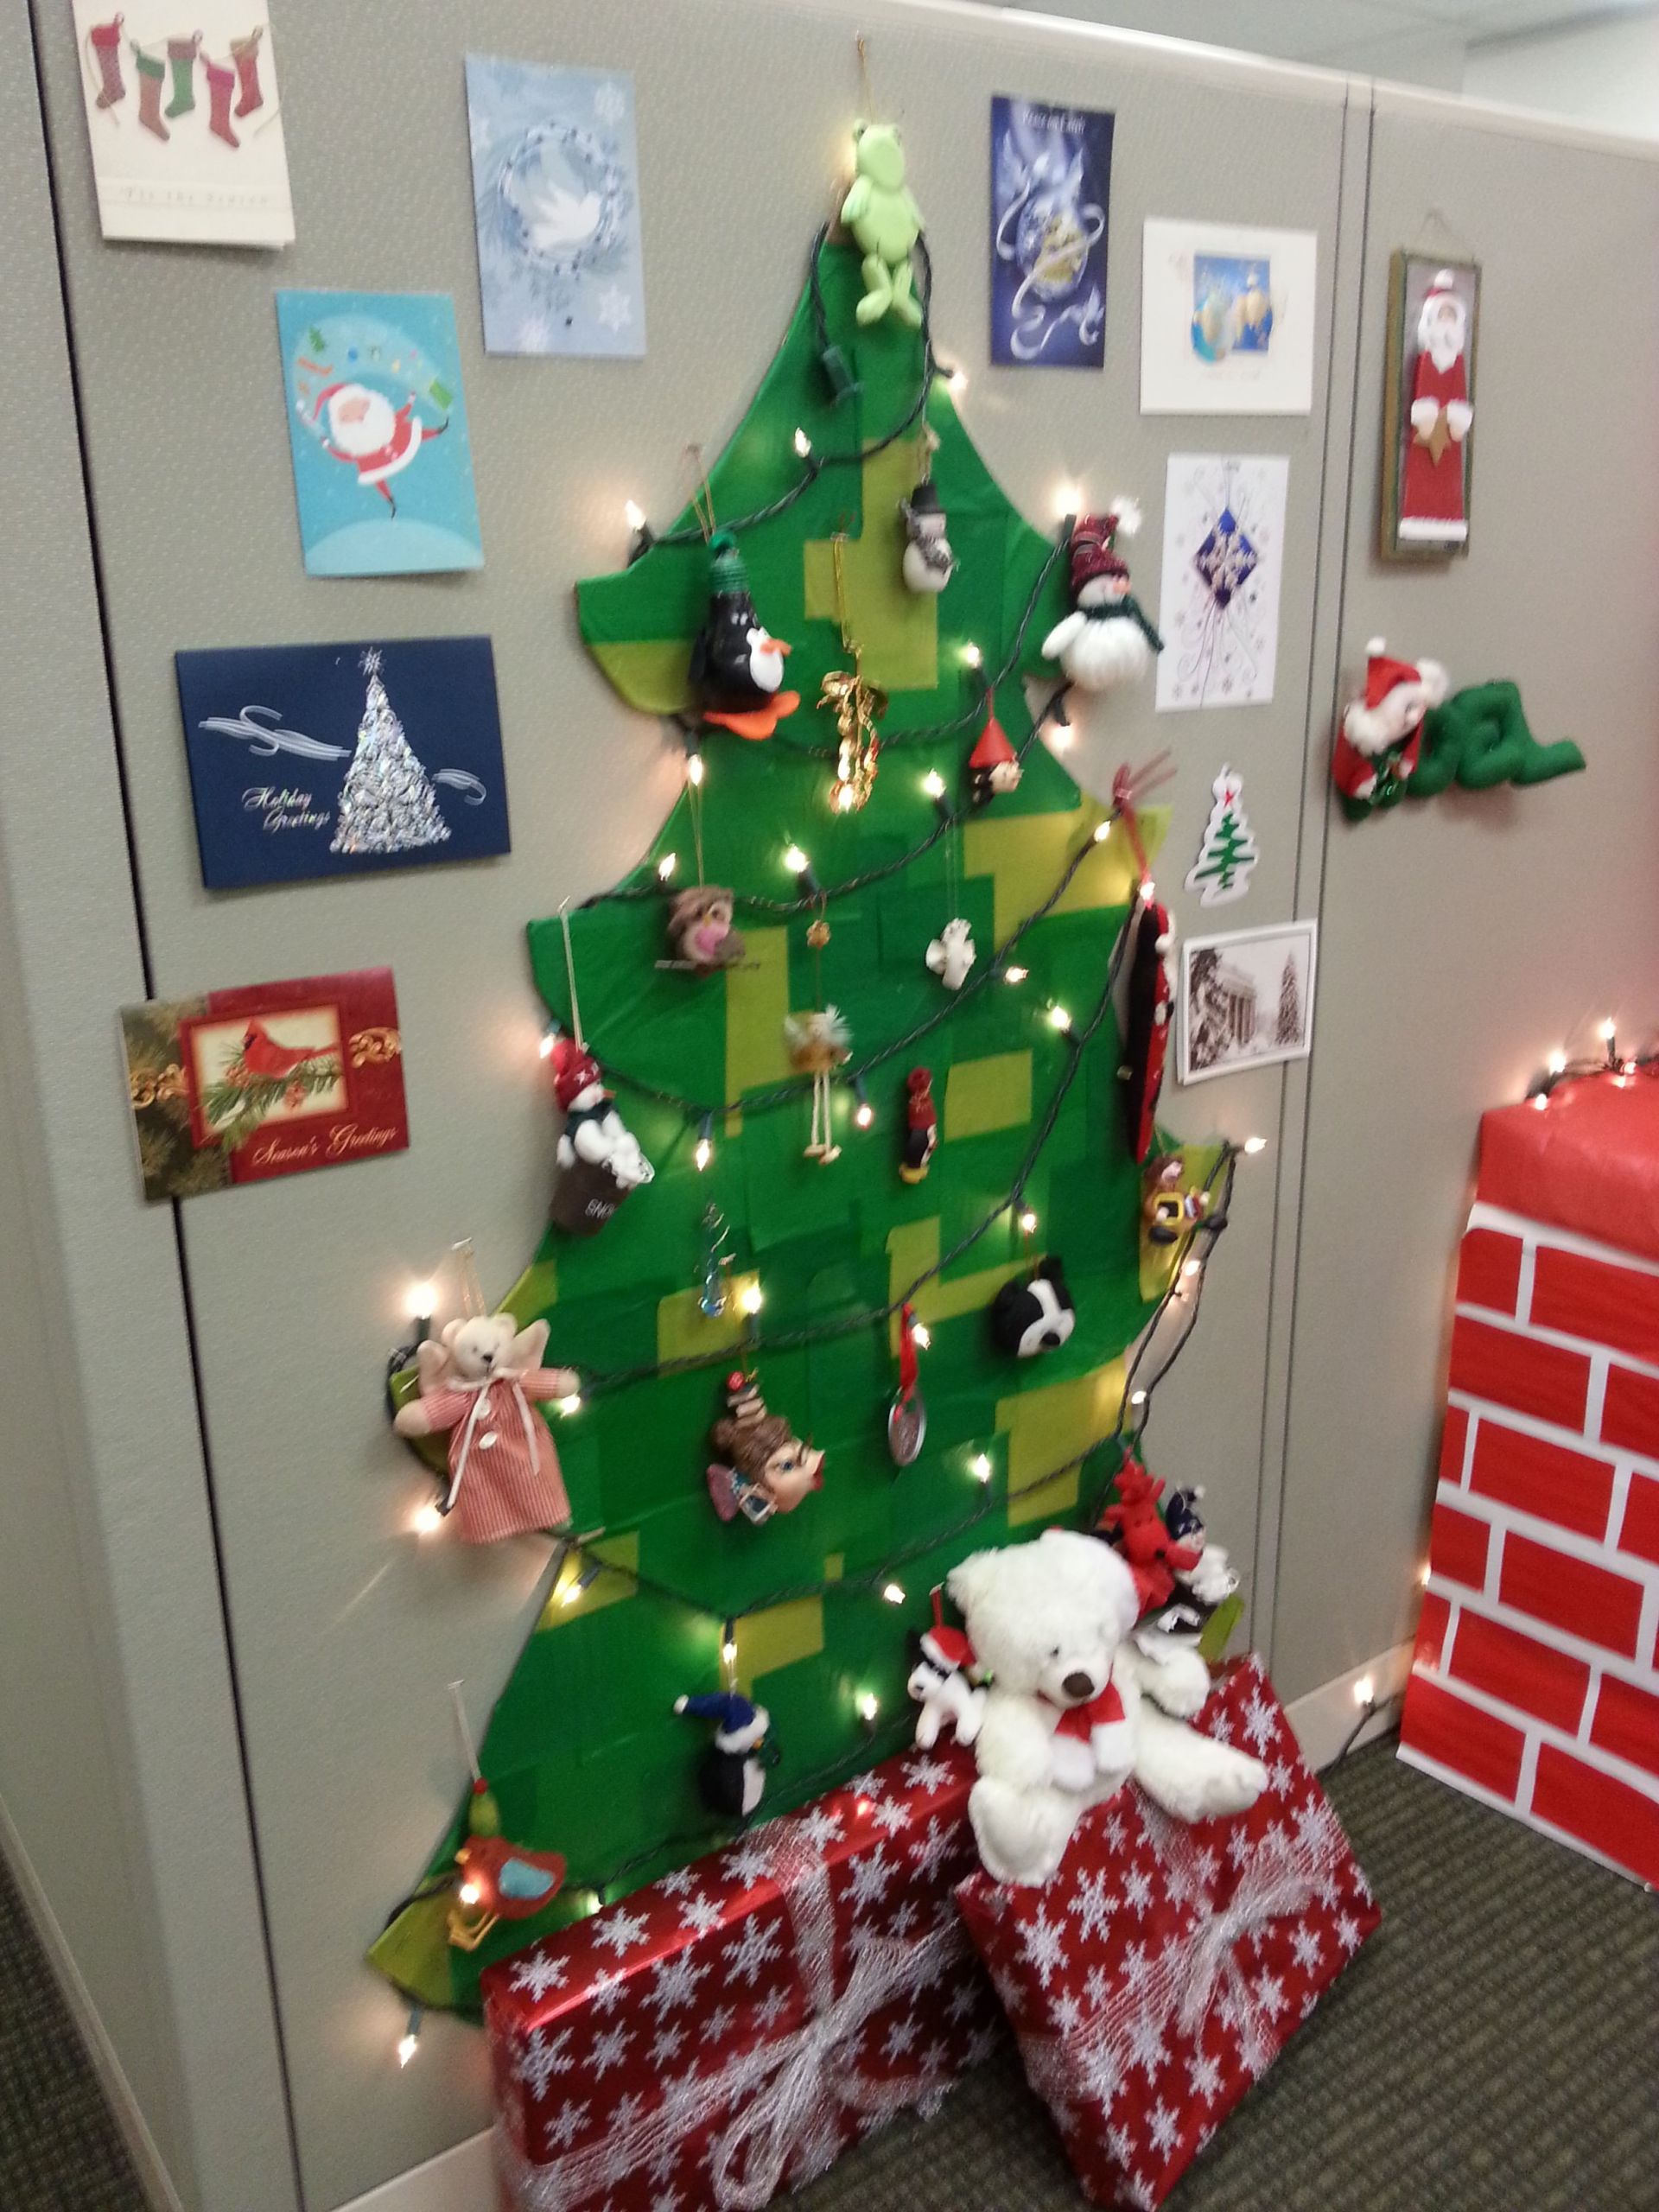 Office Cubicle Christmas Decorating Ideas
 Cubicle Christmas tree created from a large piece of